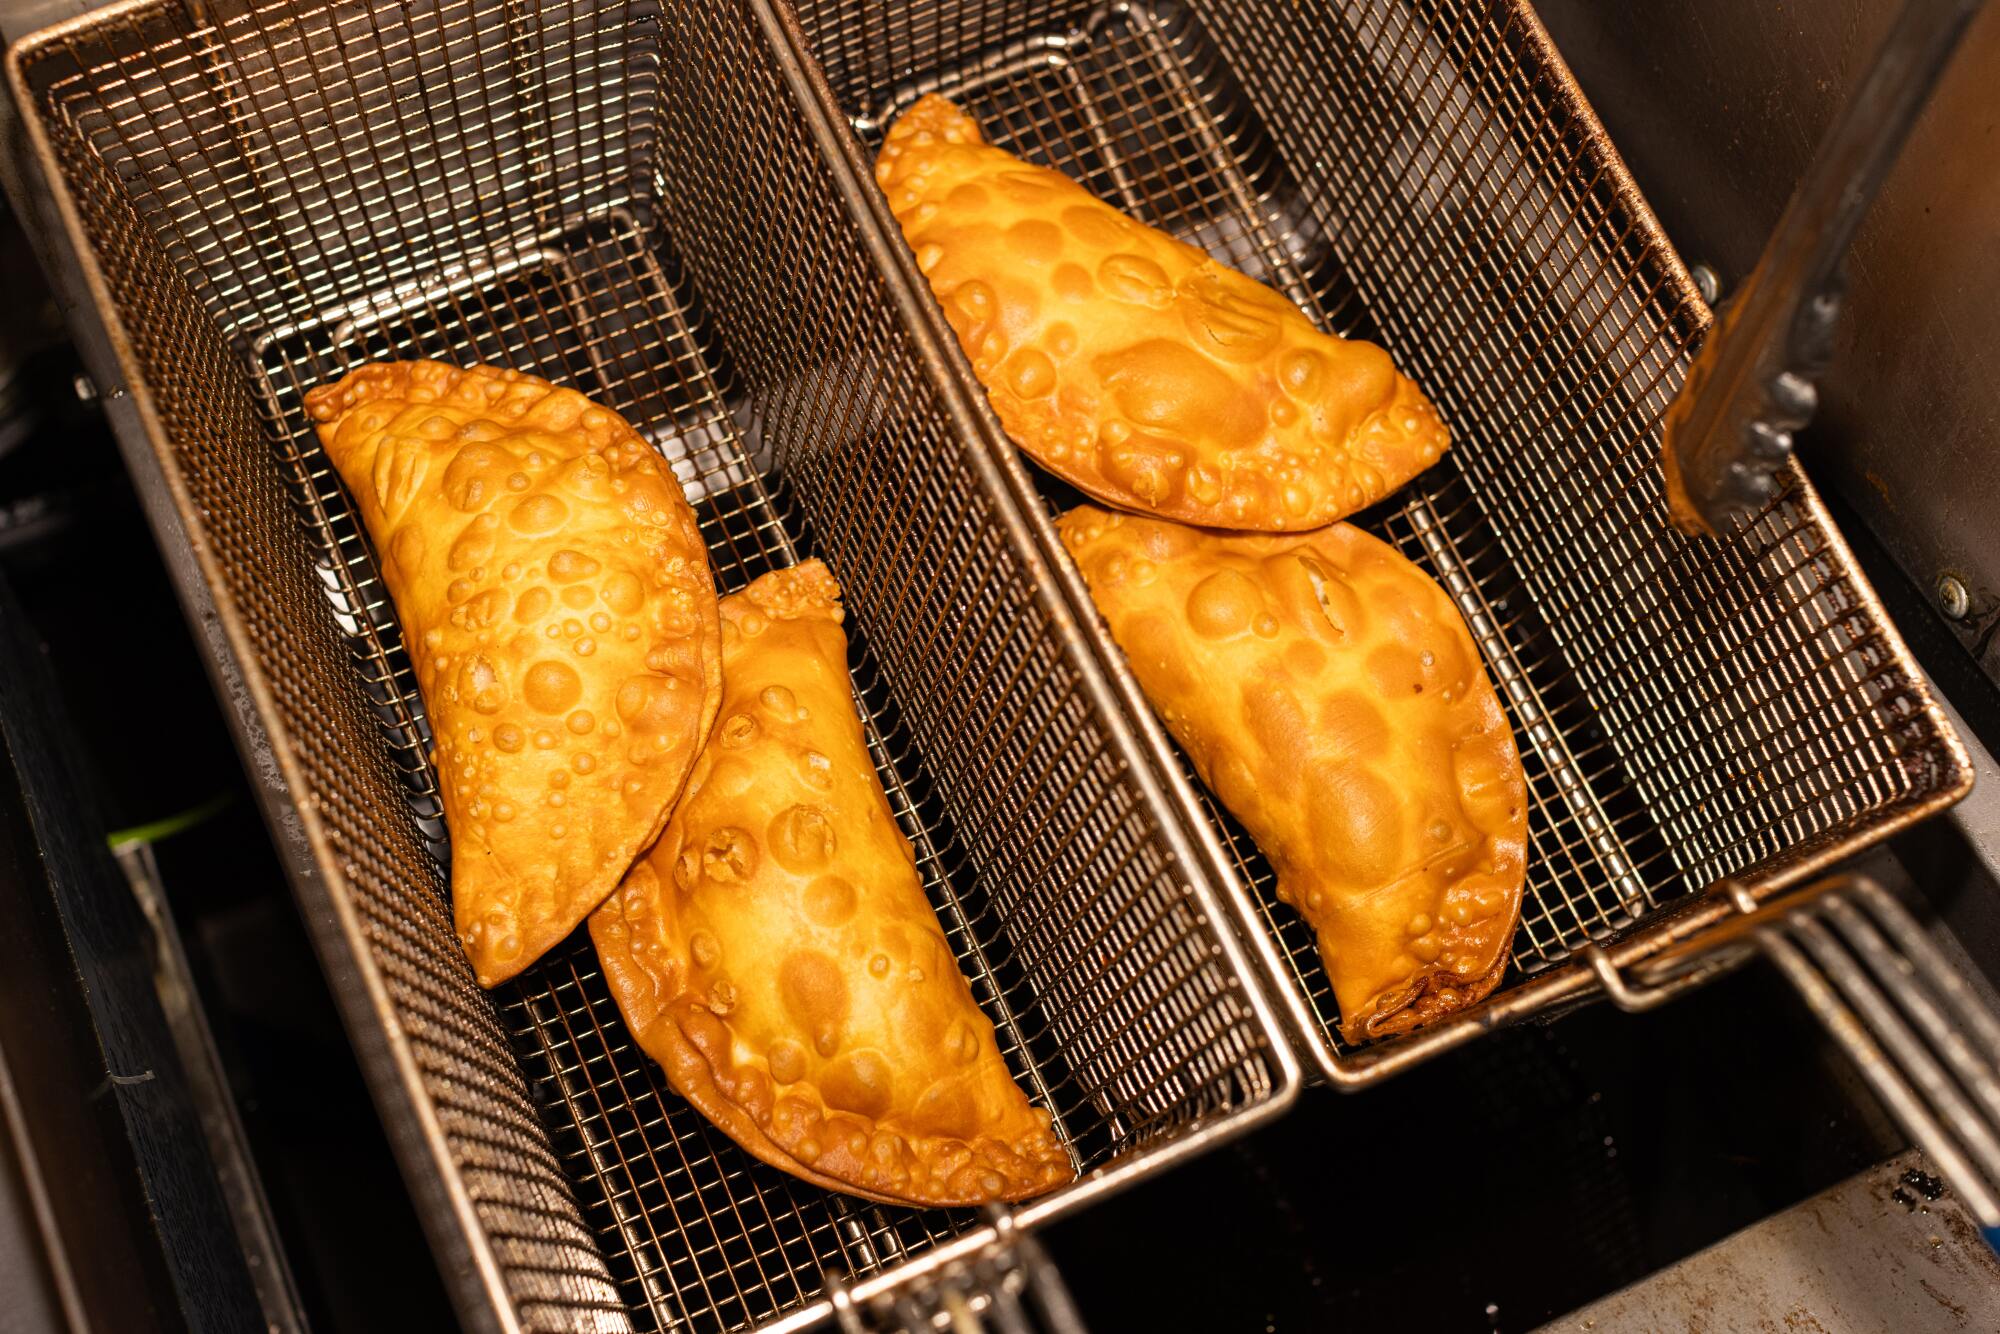 Salami and cheese empanadas and vegetable empanadas in the fryer. 